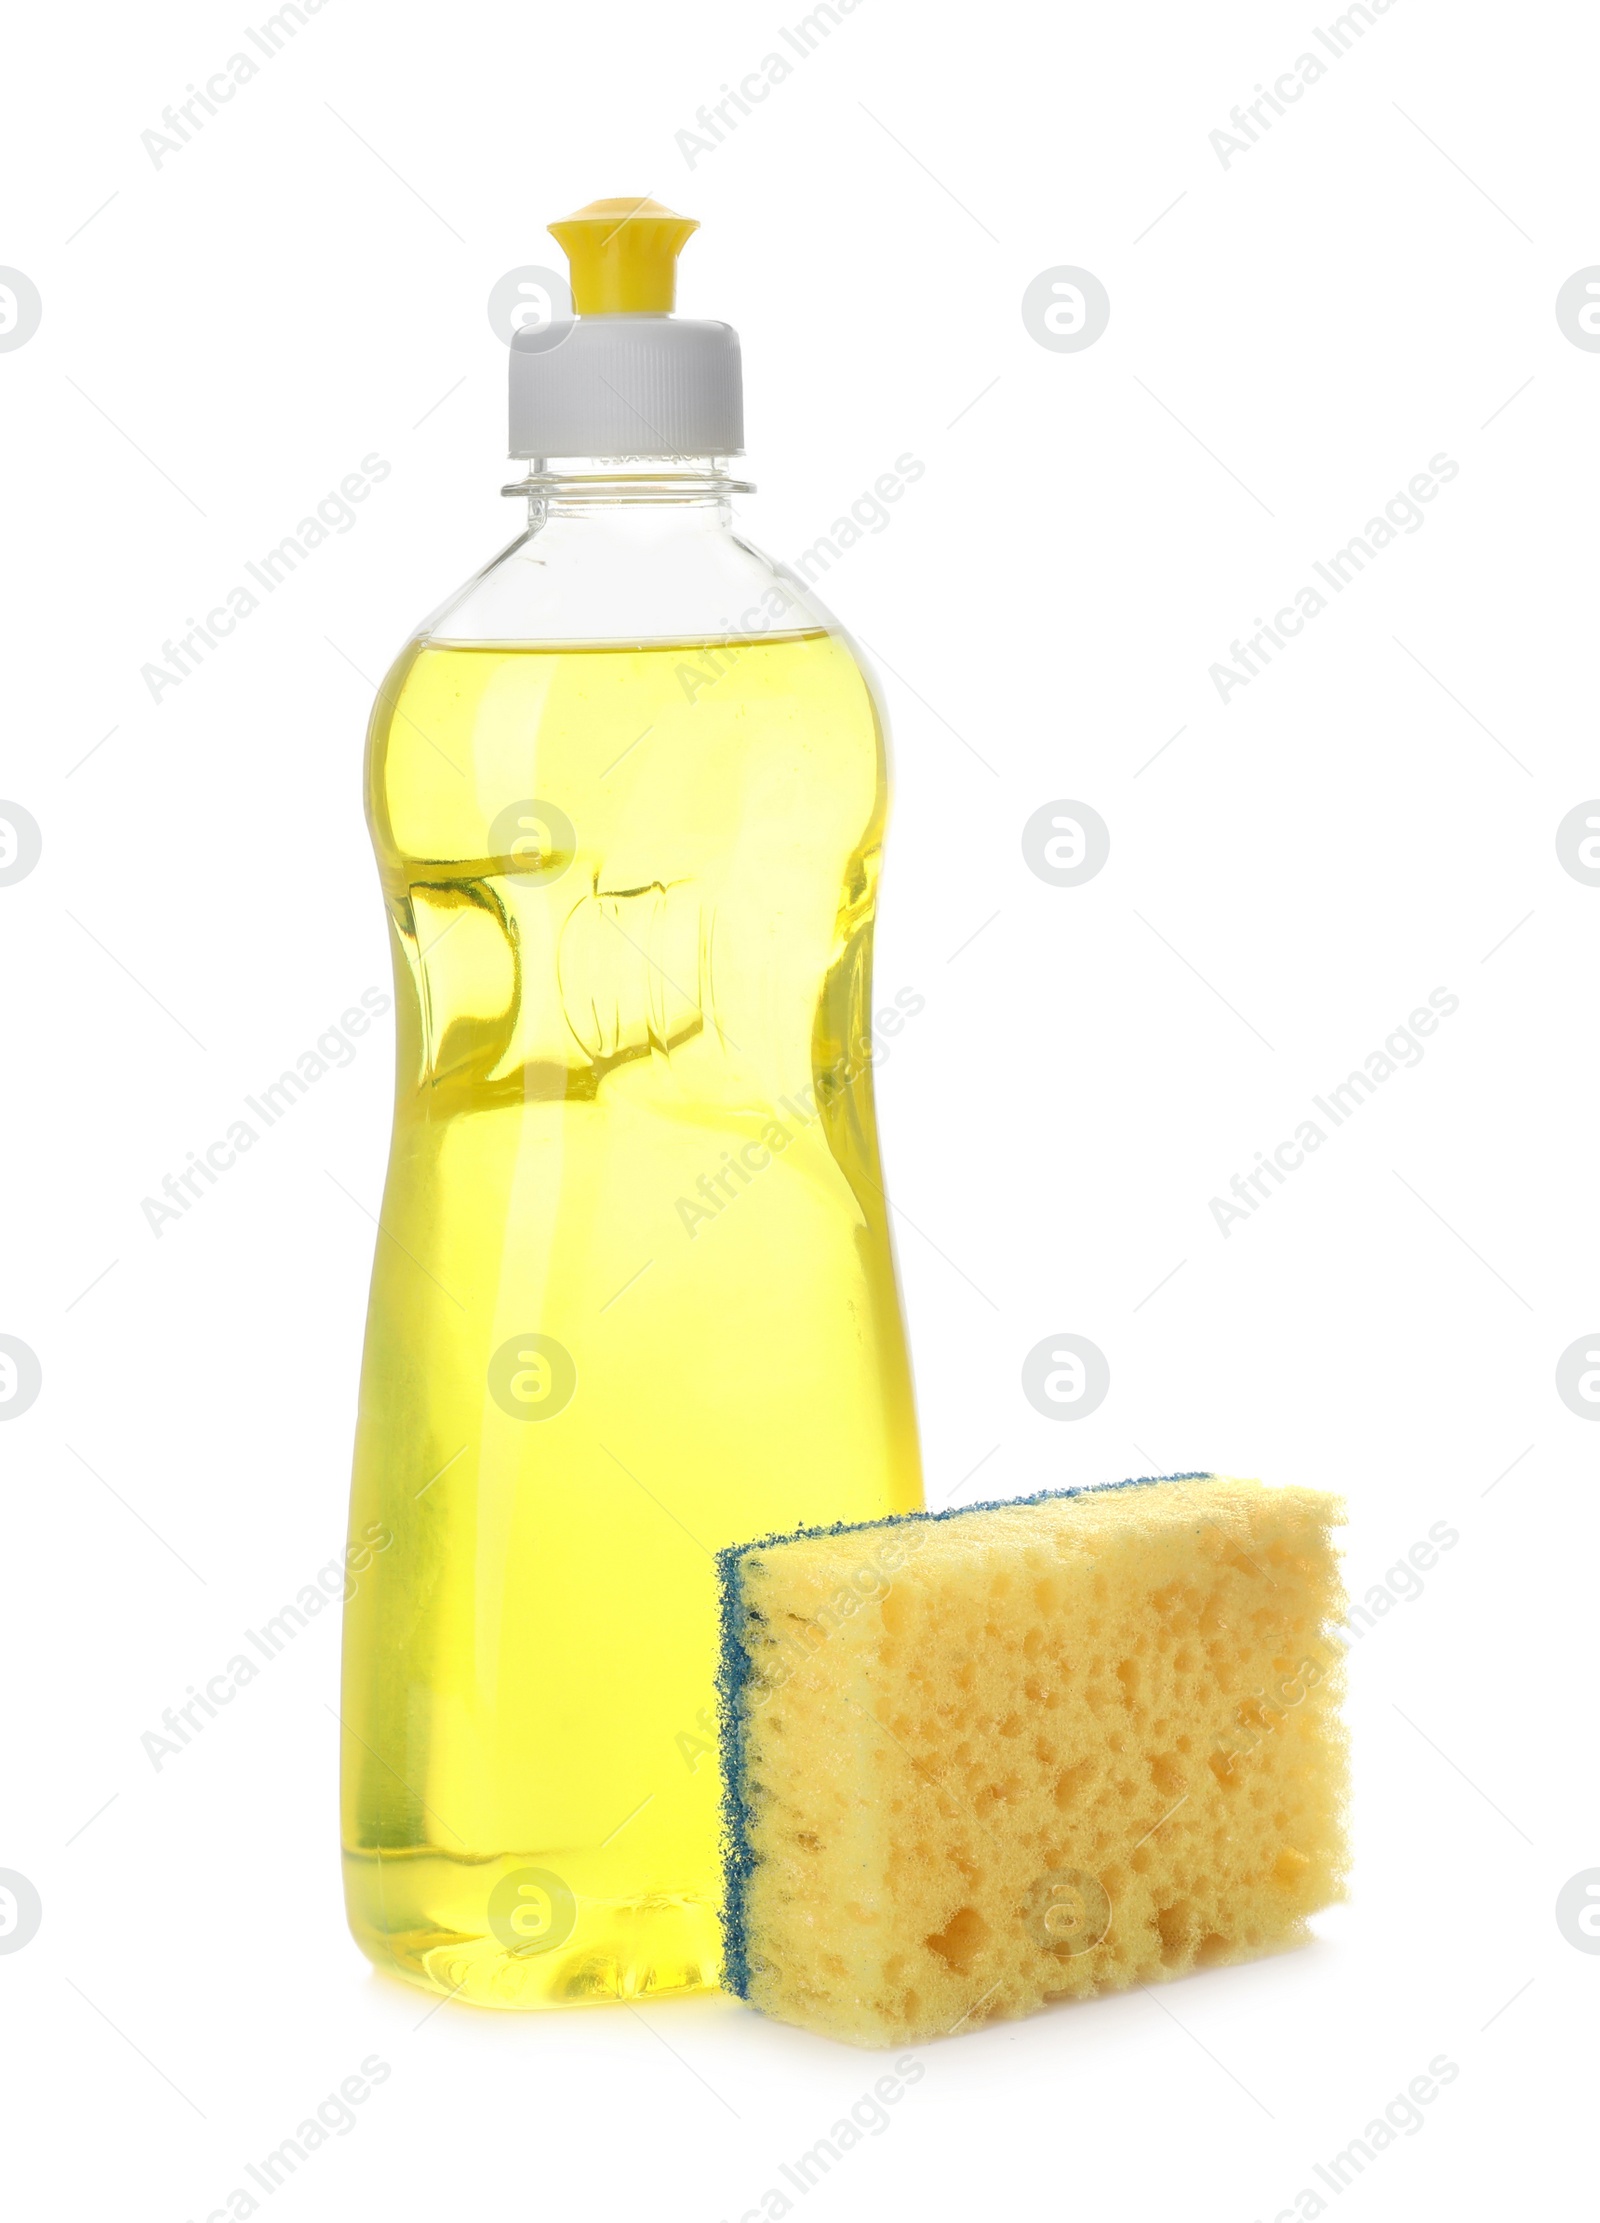 Photo of Bottle of detergent and cleaning sponge on white background